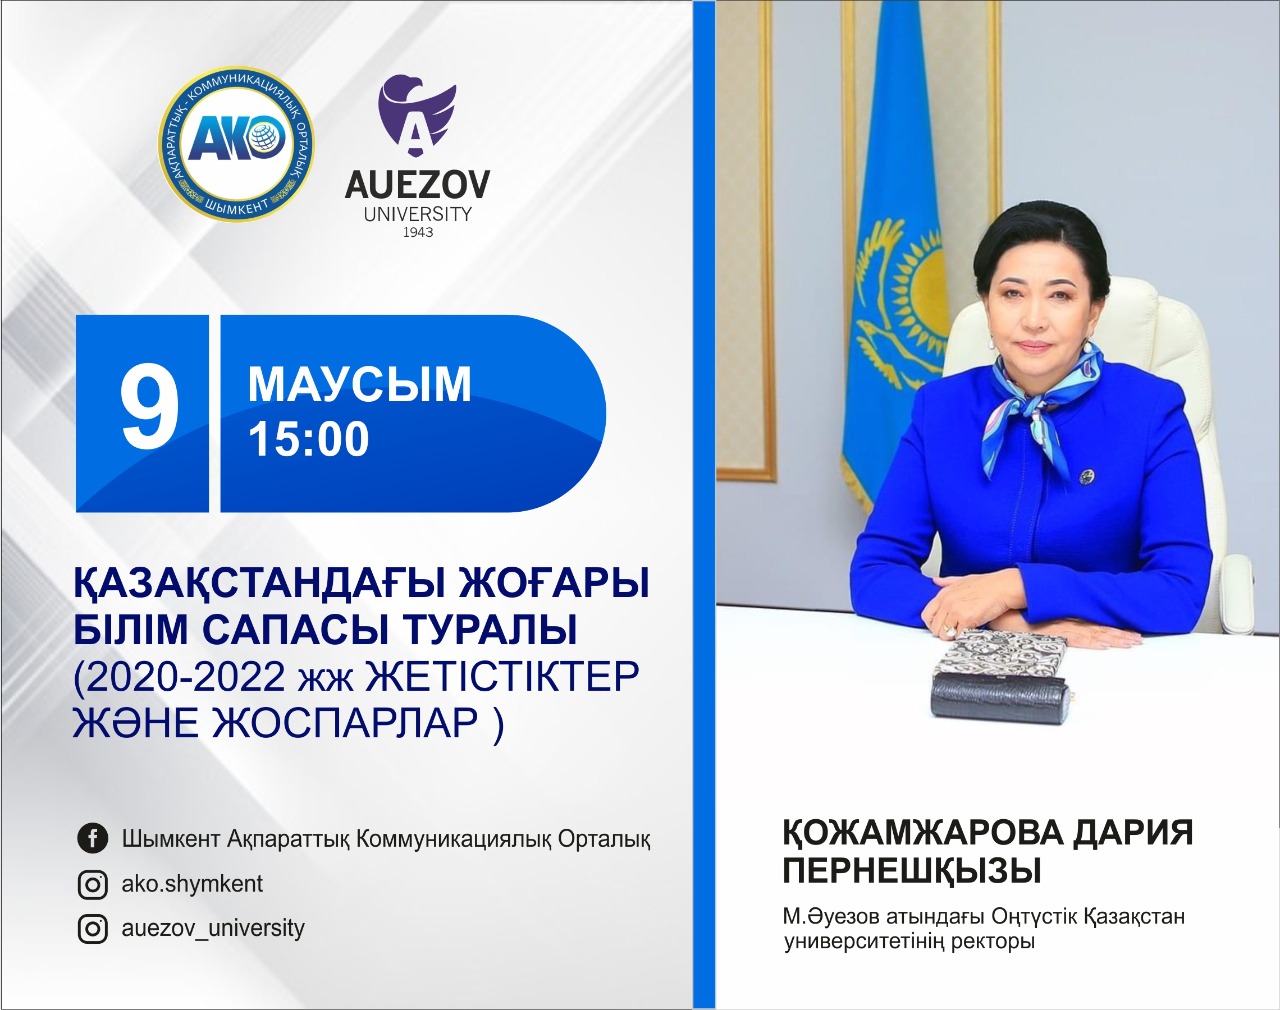  Chairman of the Board - Rector of the M. Auezov South Kazakhstan University Kozhamzharova D.P. June 9, 2021 at 15:00 will hold a briefing on the achievements and plans in the Shymkent Information and Communication Center with representatives of the repub